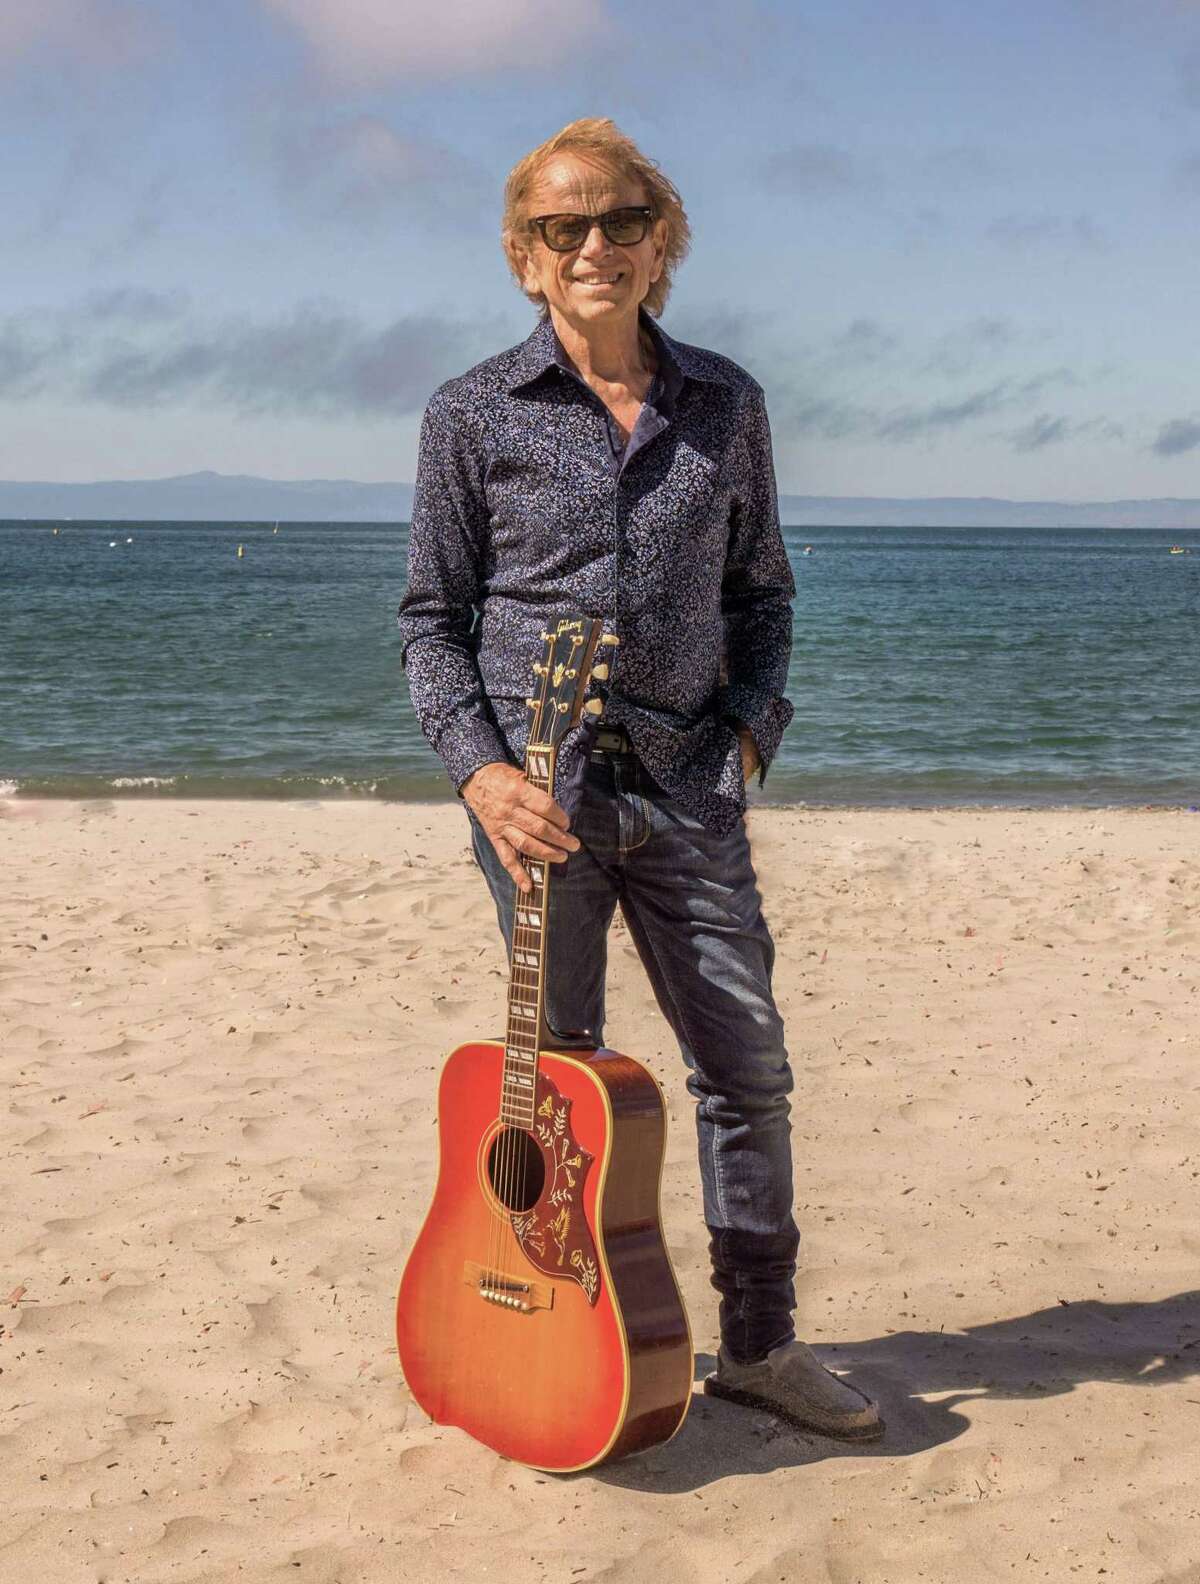 Al Jardine, an original and co-founding member of The Beach Boys, is bringing his "Family & Friends Tour" to the Warner Theatre in downtown Torrington on March 5, 2022.